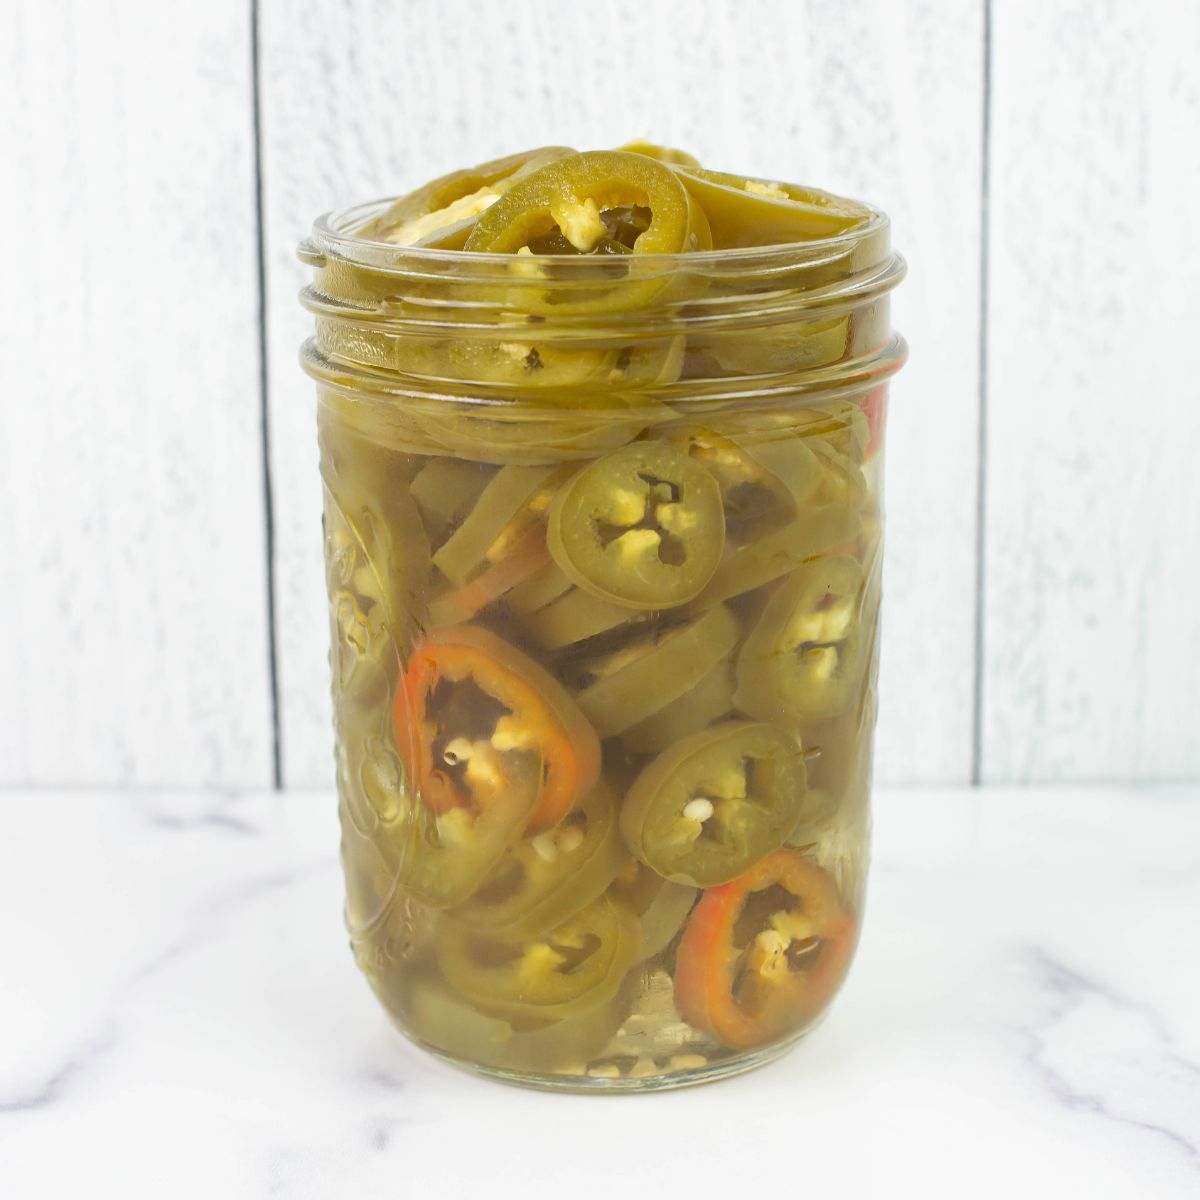 A canning jar filled with pickled pepper slices.